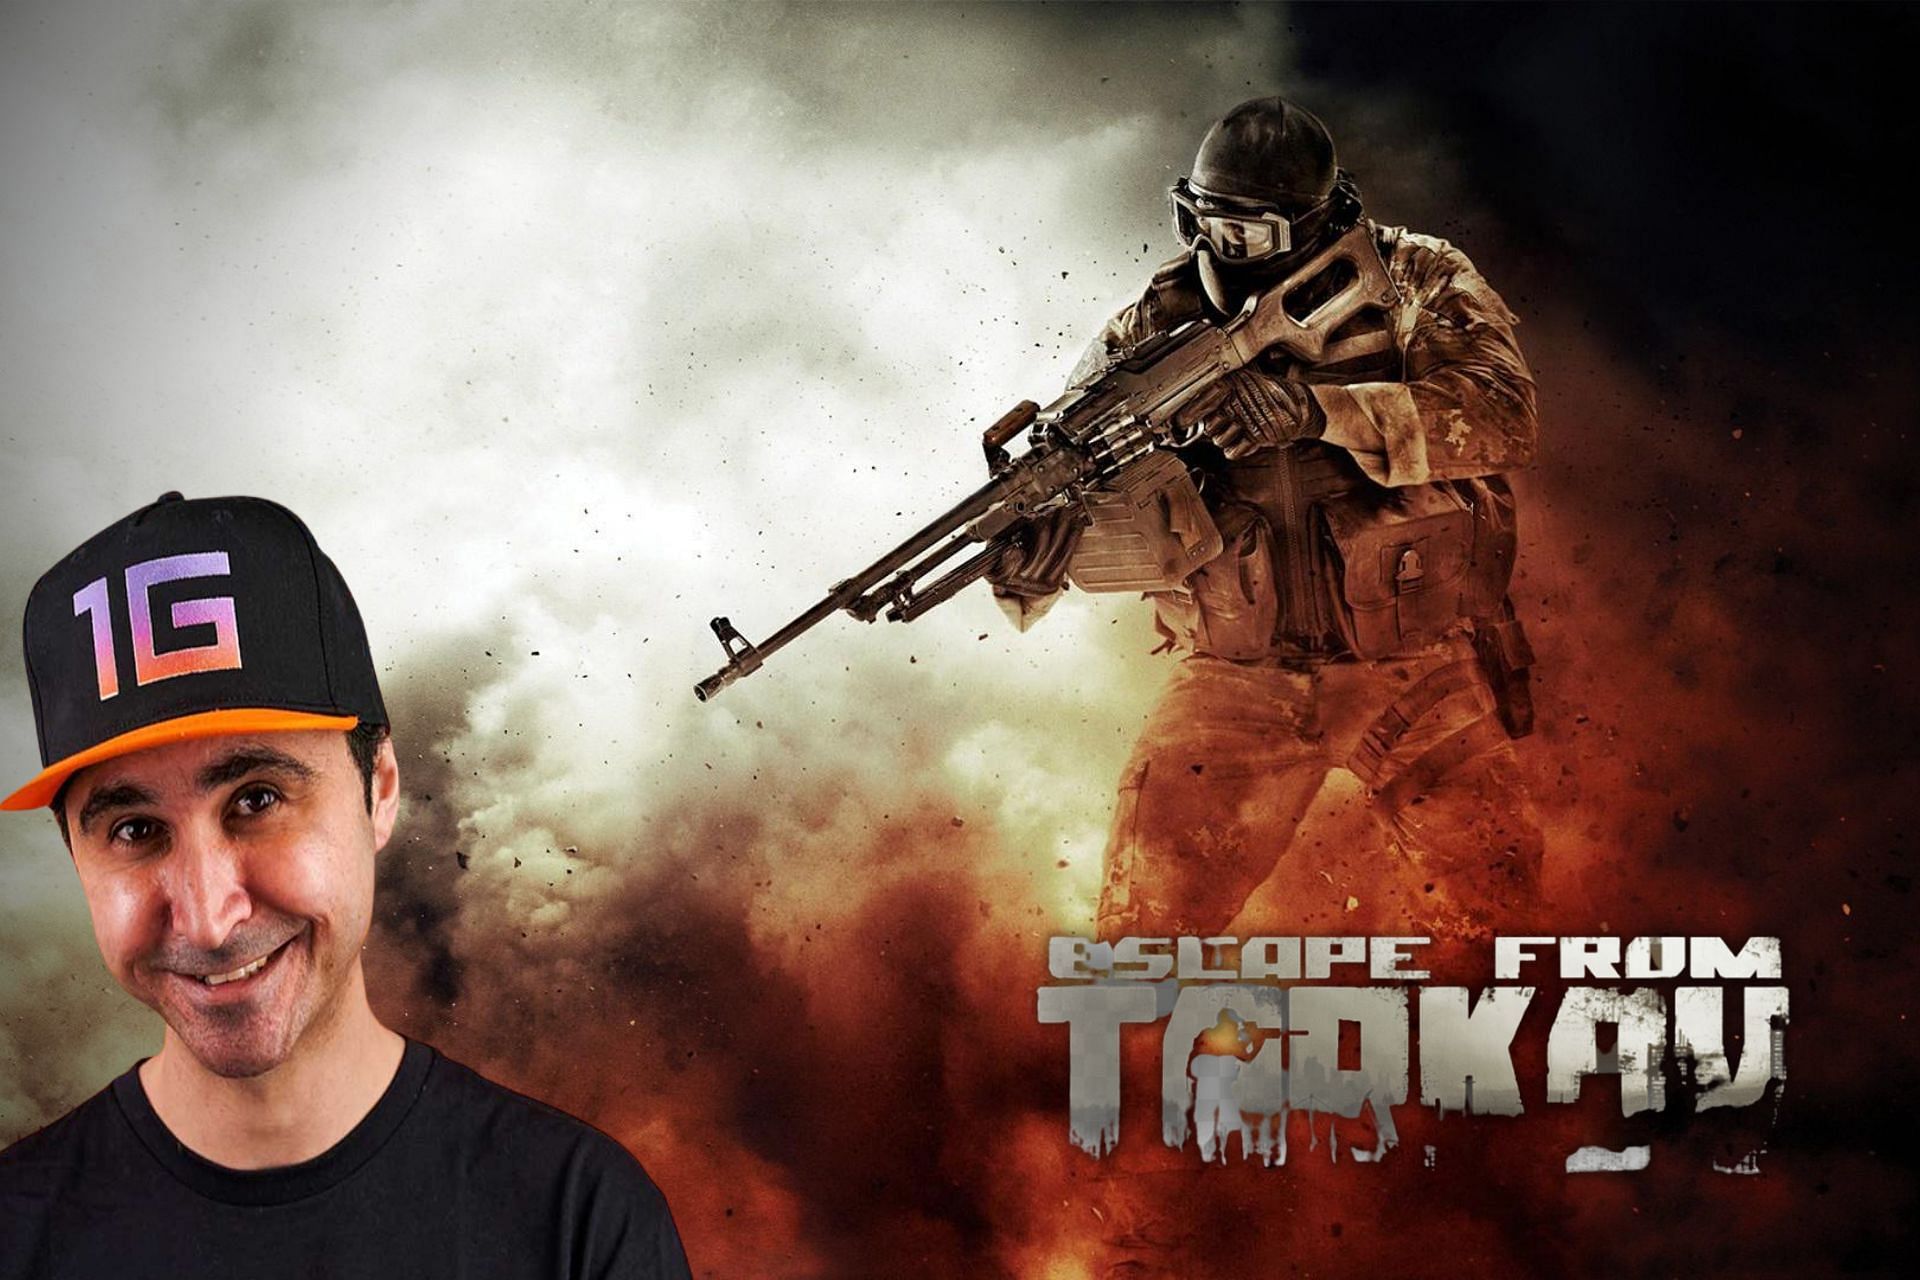 Summit1G&#039;s plans to talk to the enemies in Escape From Tarkov didn&#039;t go as planned (Image via Sportskeeda)